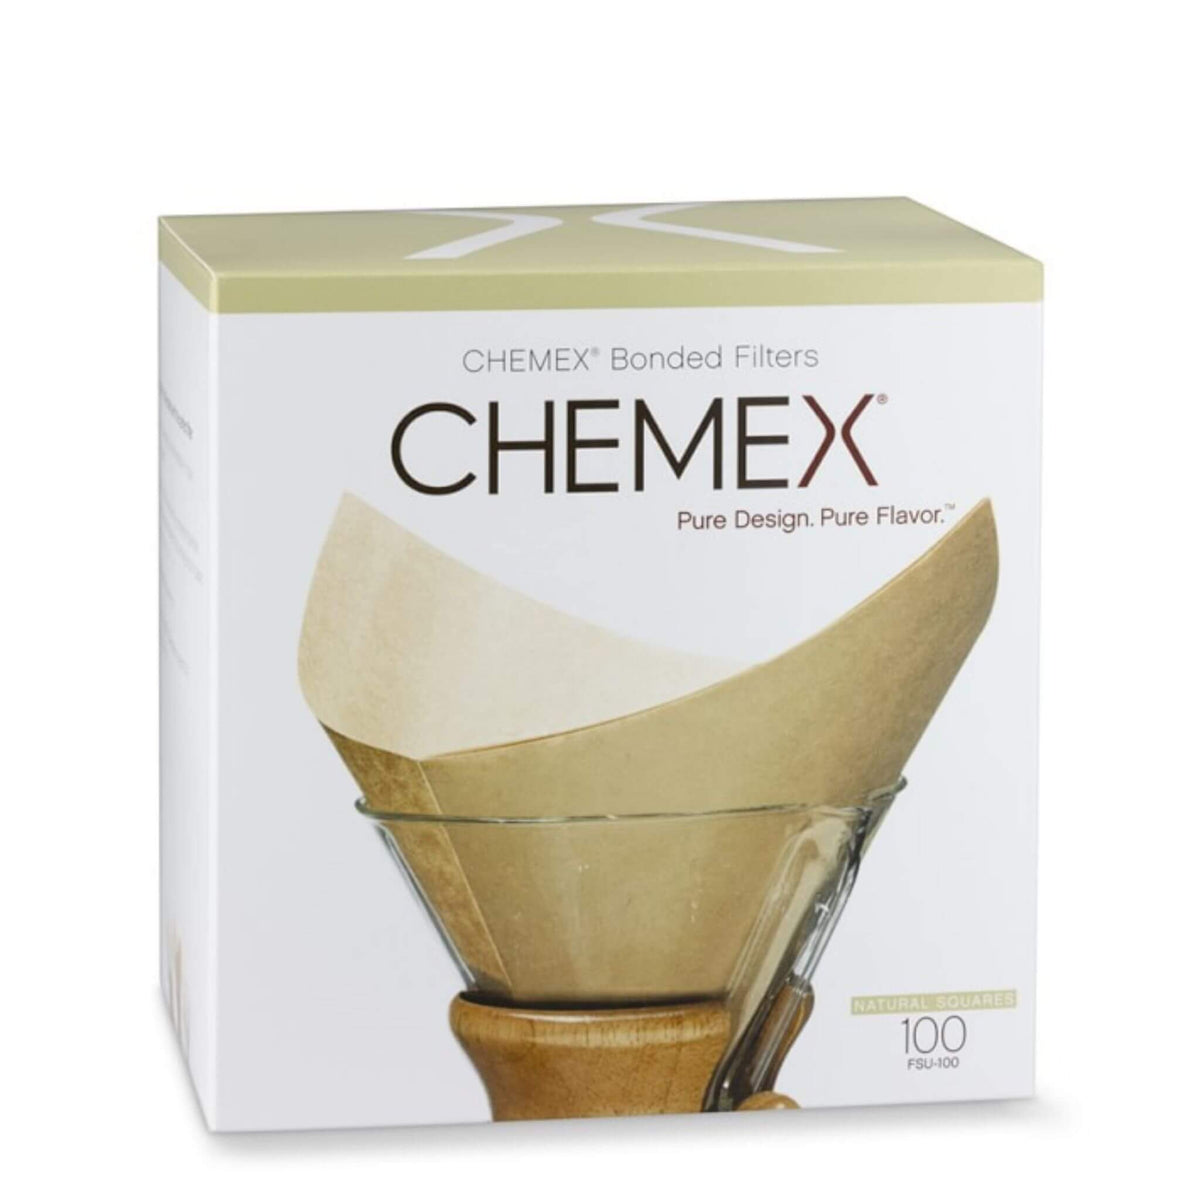 Chemex Coffee Filter Box Of Bleached Filters 100 Count